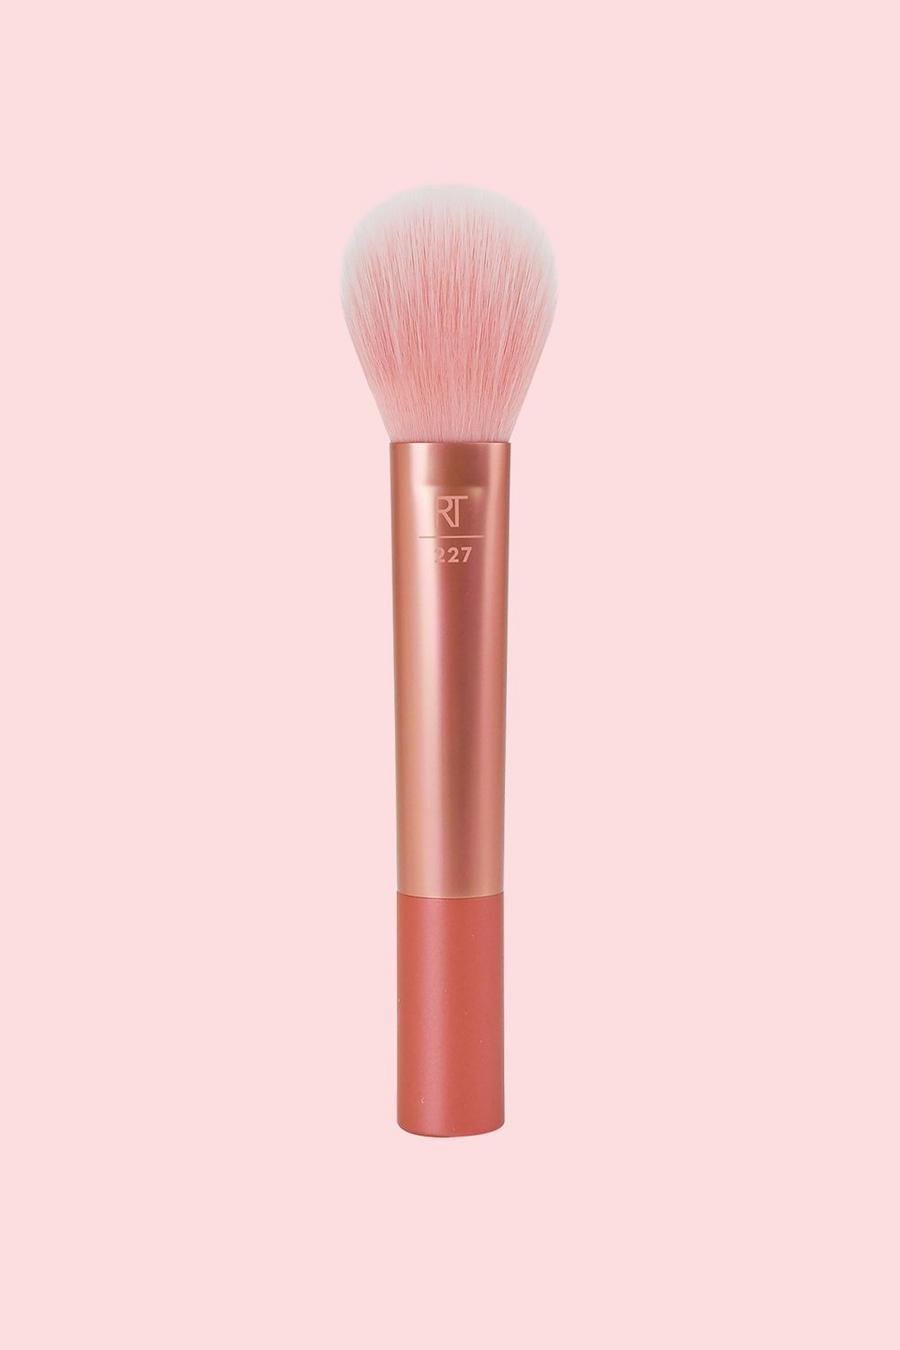 Pink rosa REAL TECHNIQUES LIGHT LAYER POWDER MAKEUP BRUSH